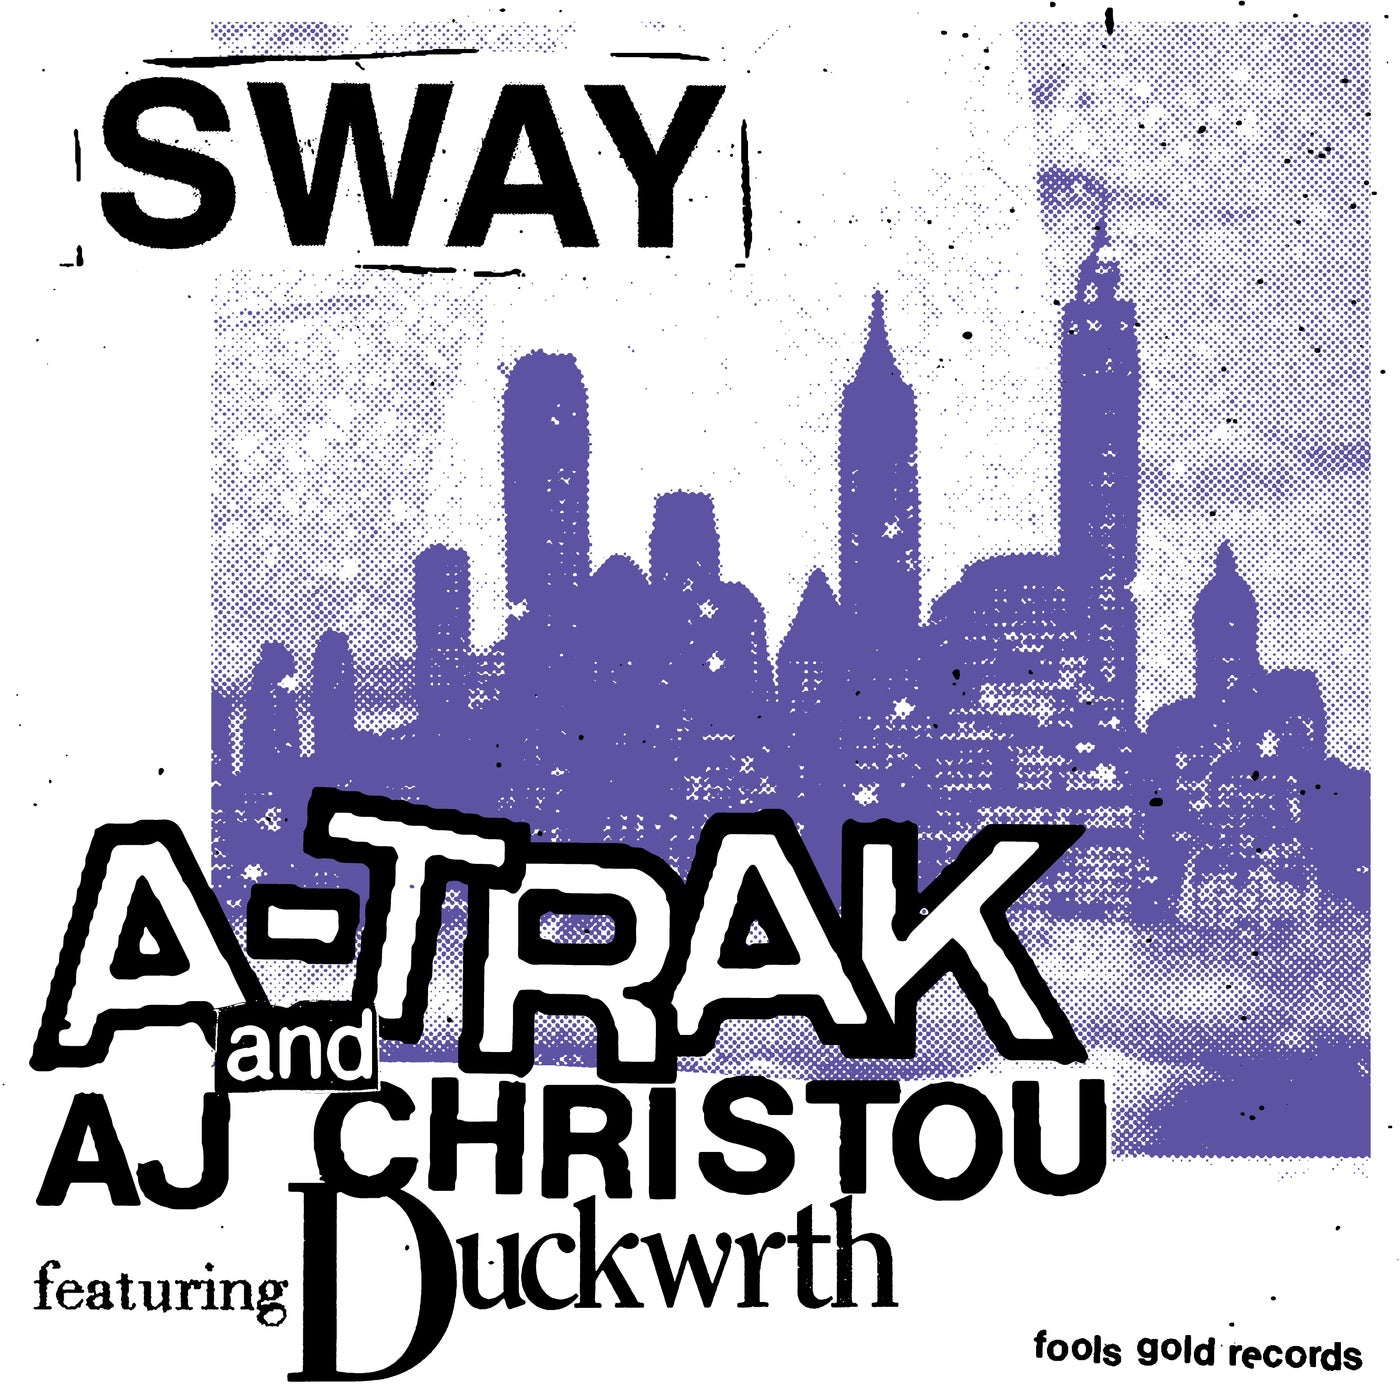 image cover: A-Trak, AJ Christou - Sway on Fool's Gold Records